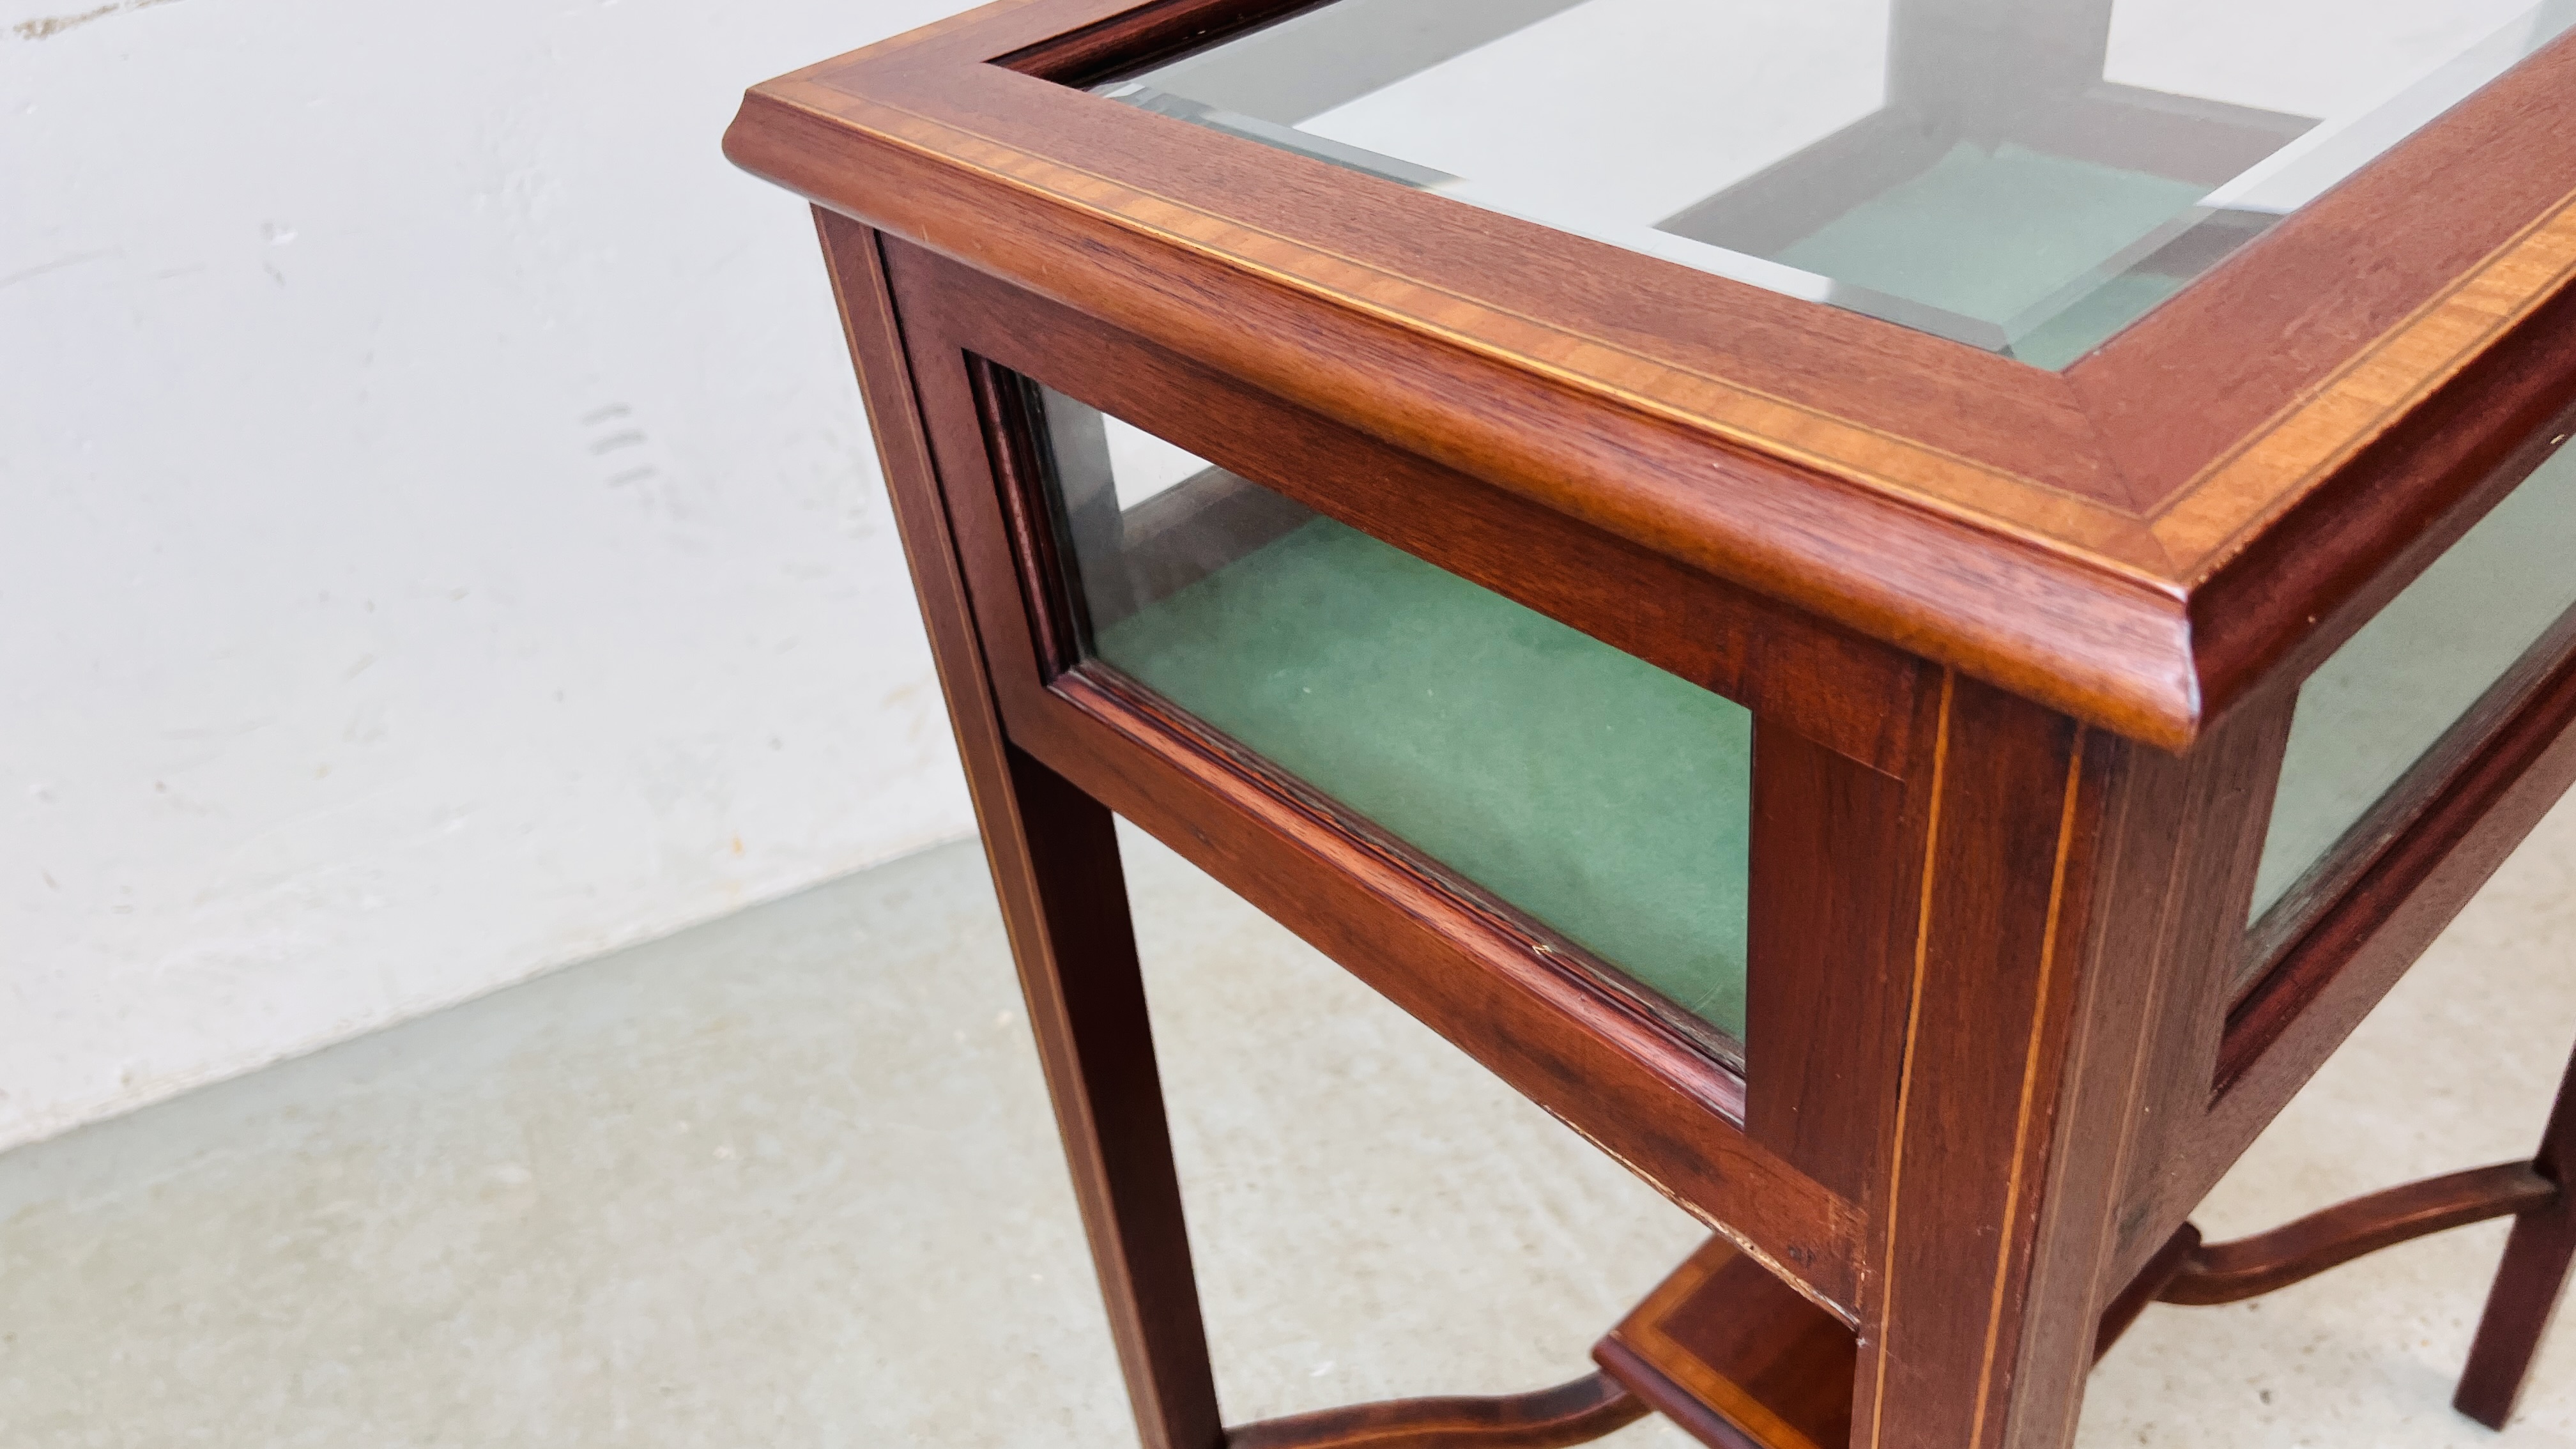 A MAHOGANY AND INLAID GLASS CASED FLOOR STANDING DISPLAY CASE W 57CM. H 76CM. D 40CM. - Image 8 of 11